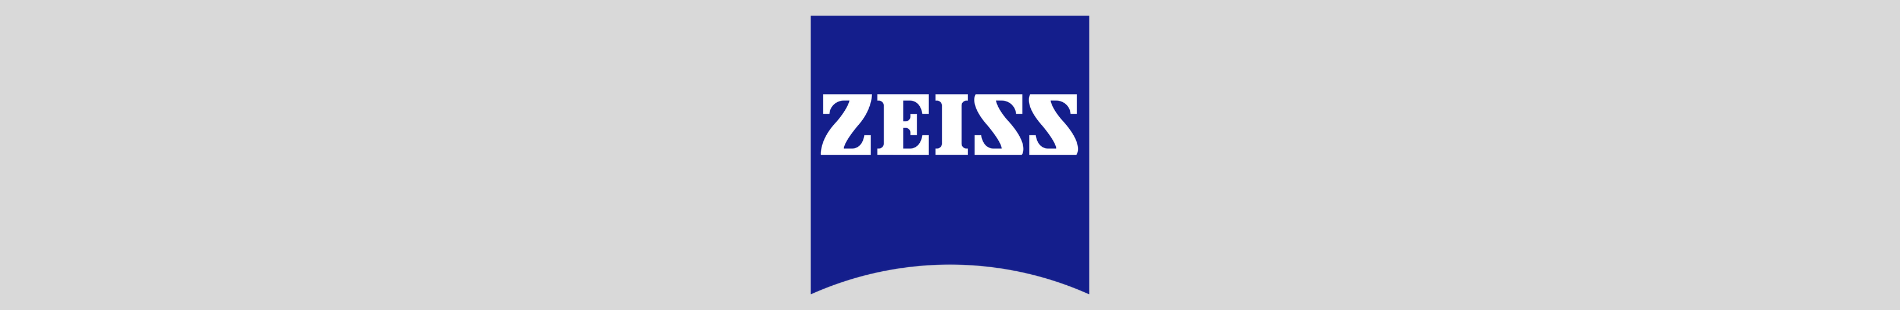 Banner image for Ocuco Rolls out Zeiss Electronic Ordering Link